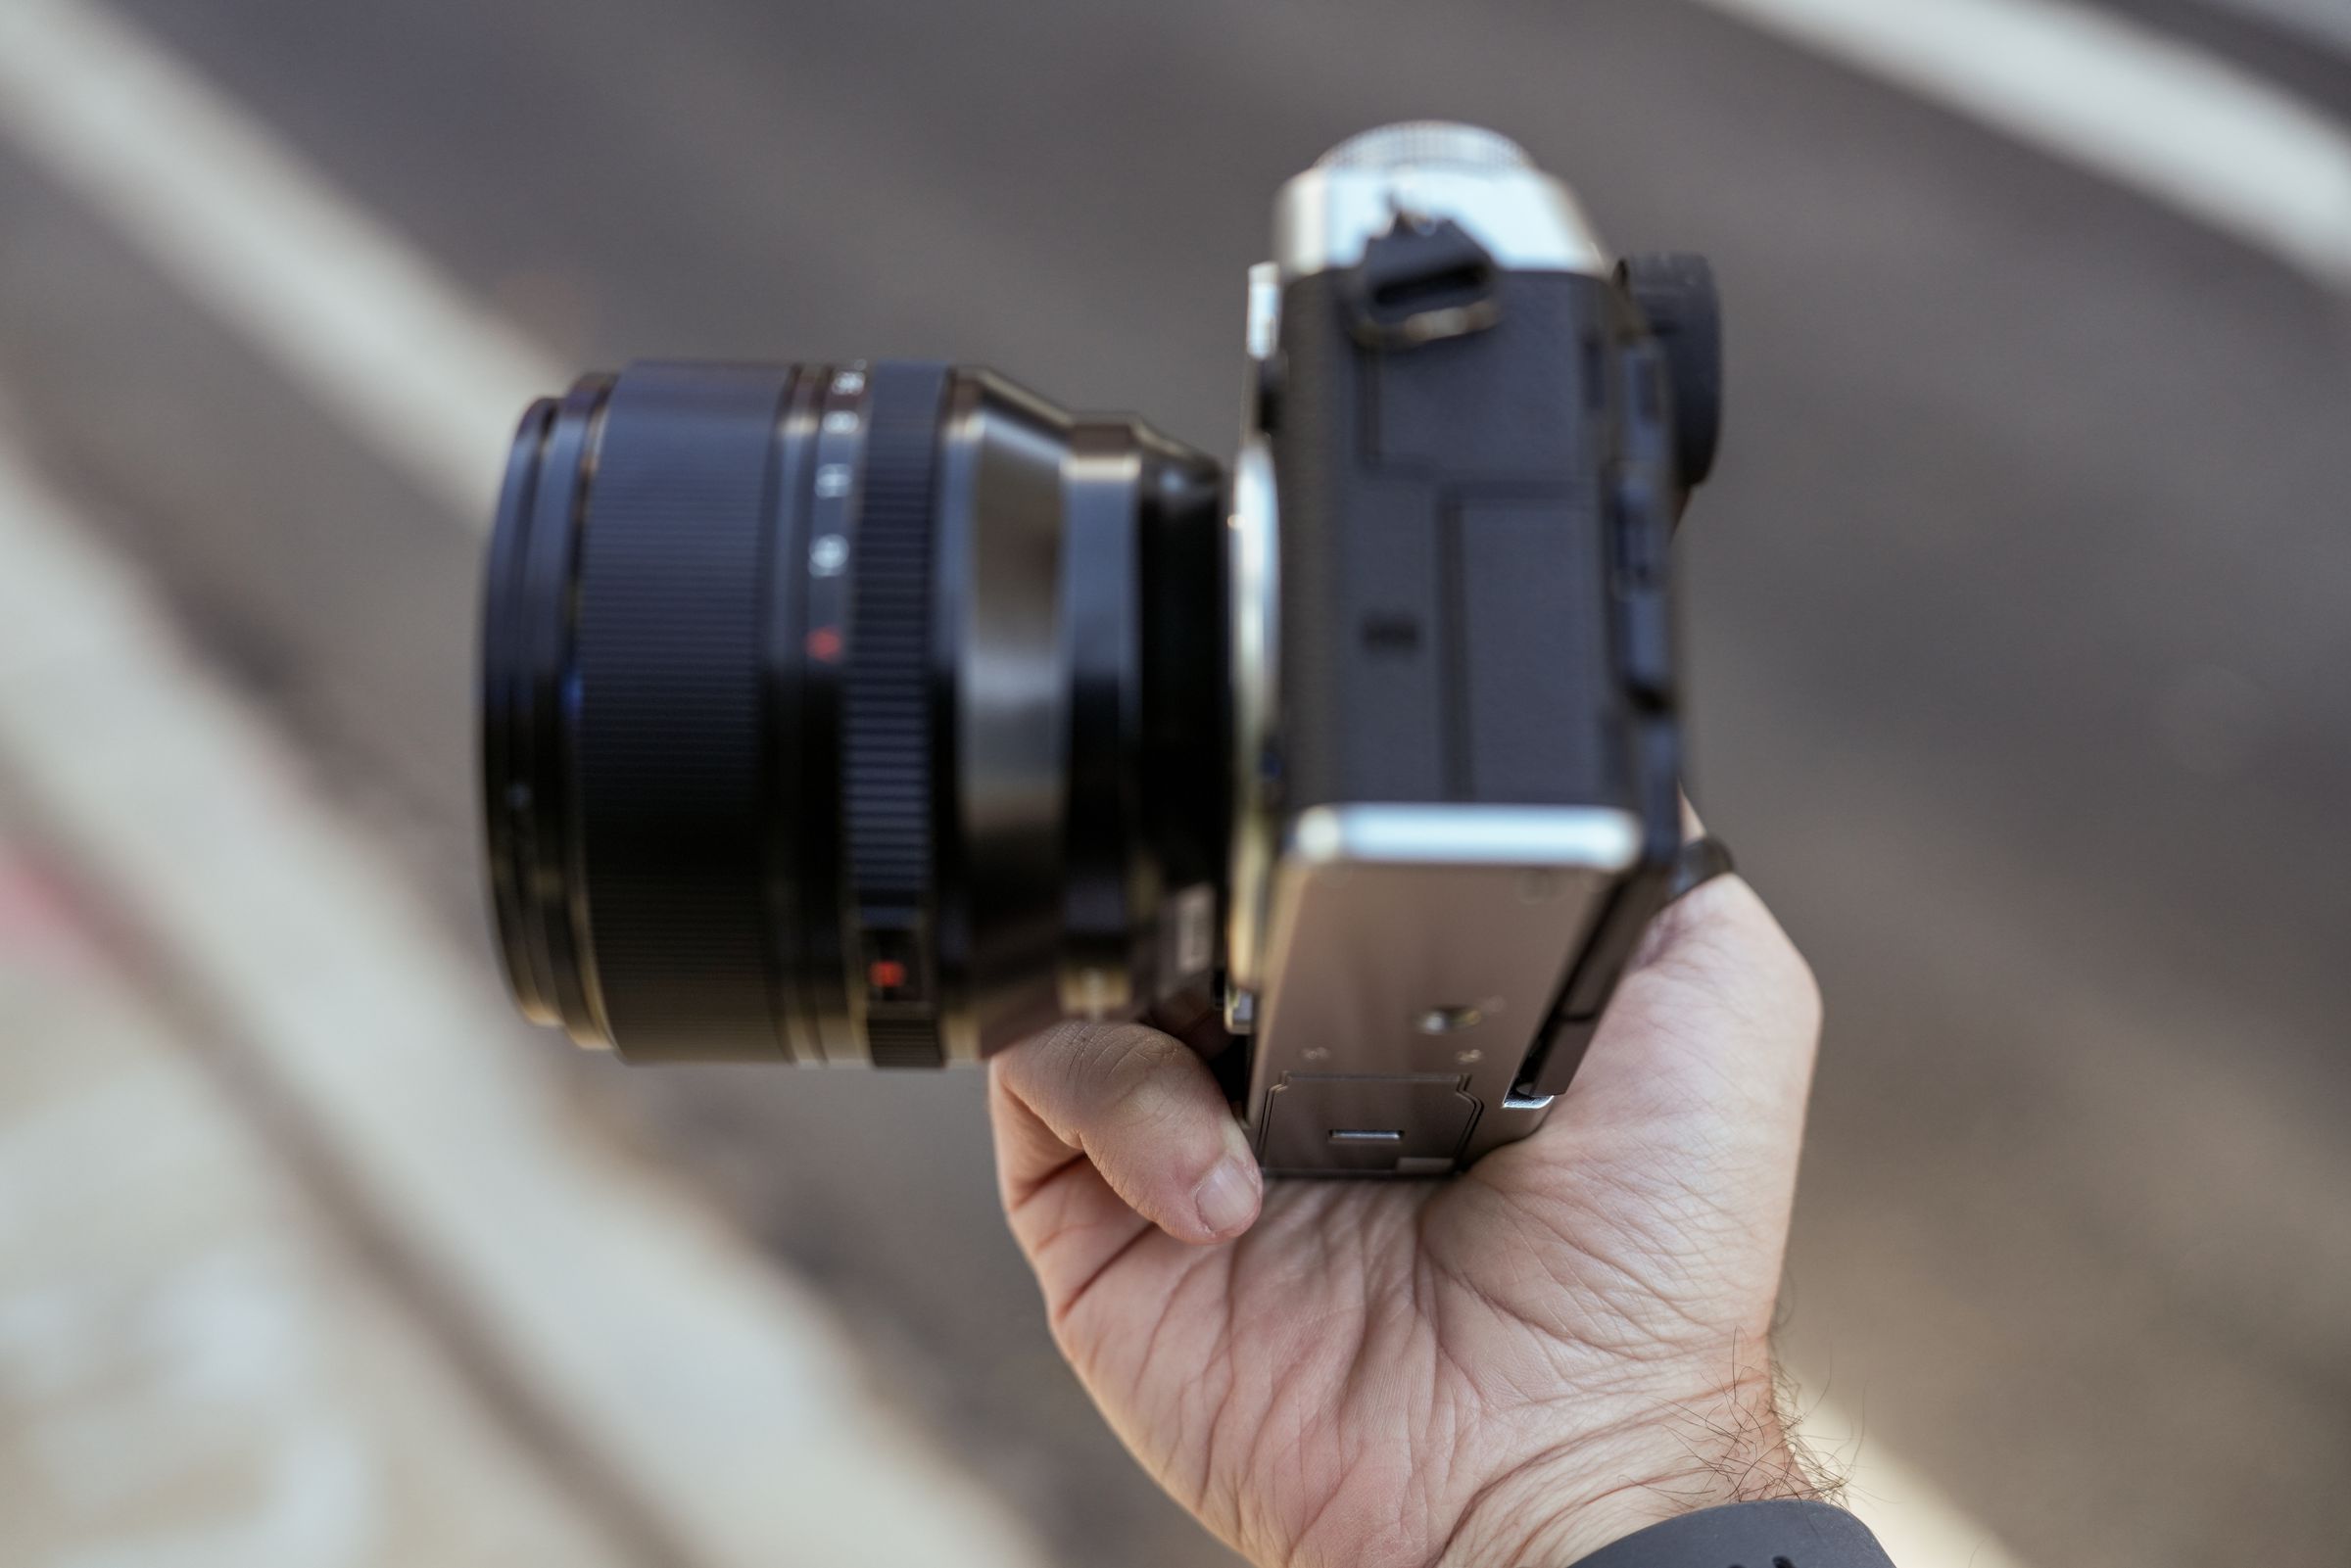 The smaller size of the X-T5 means your pinky is going to float in no-man’s-land. I suggest considering the add-on handgrip to help remedy this.